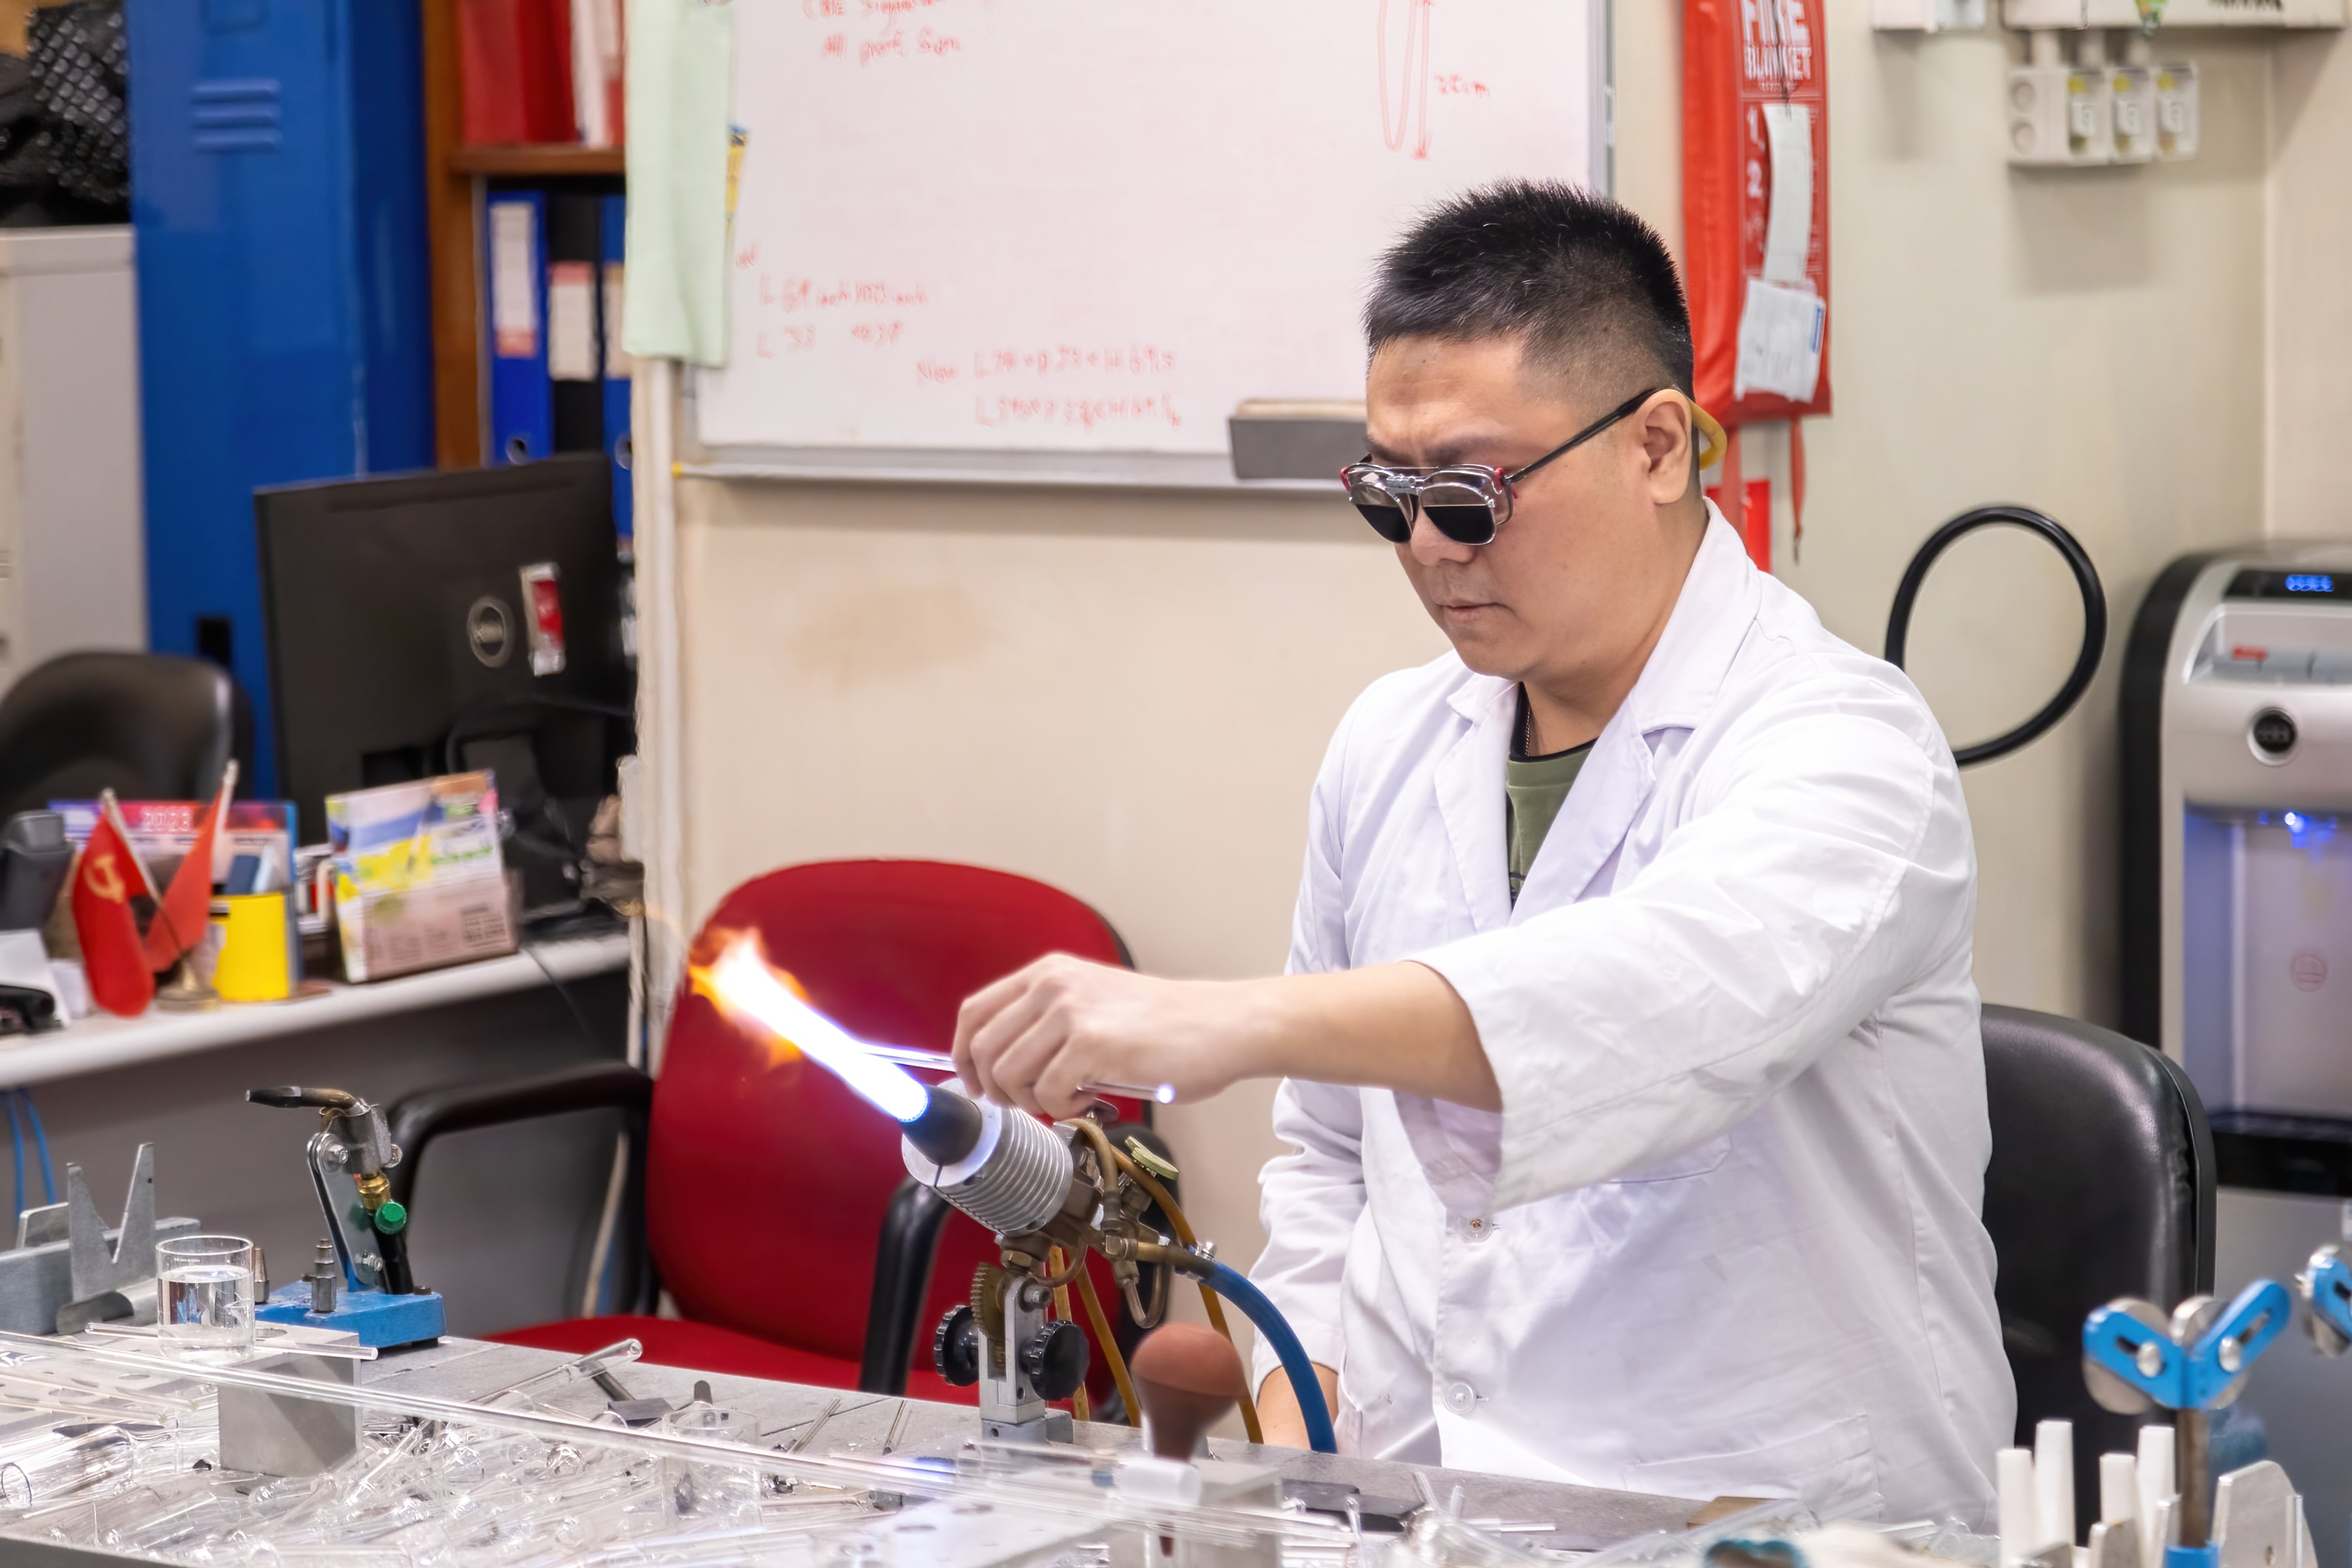 The young scientists visited the Glassblowing Facility and gained insights into its role in facilitating researchers at HKUST with the design and production of custom glass tools tailored to the specific needs of diverse research facilities.